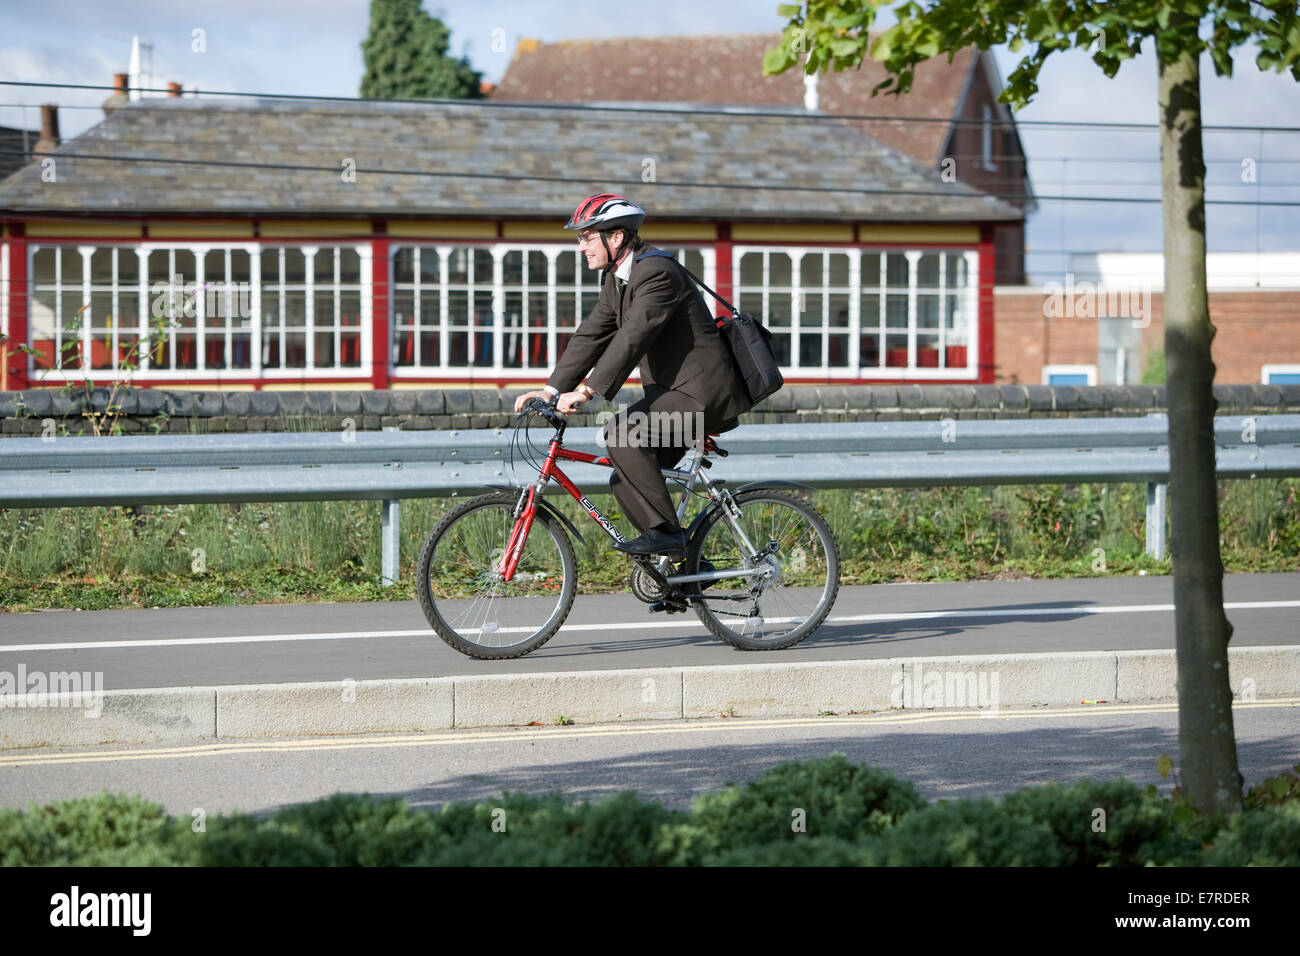 Commuter riding a bicycle Stock Photo